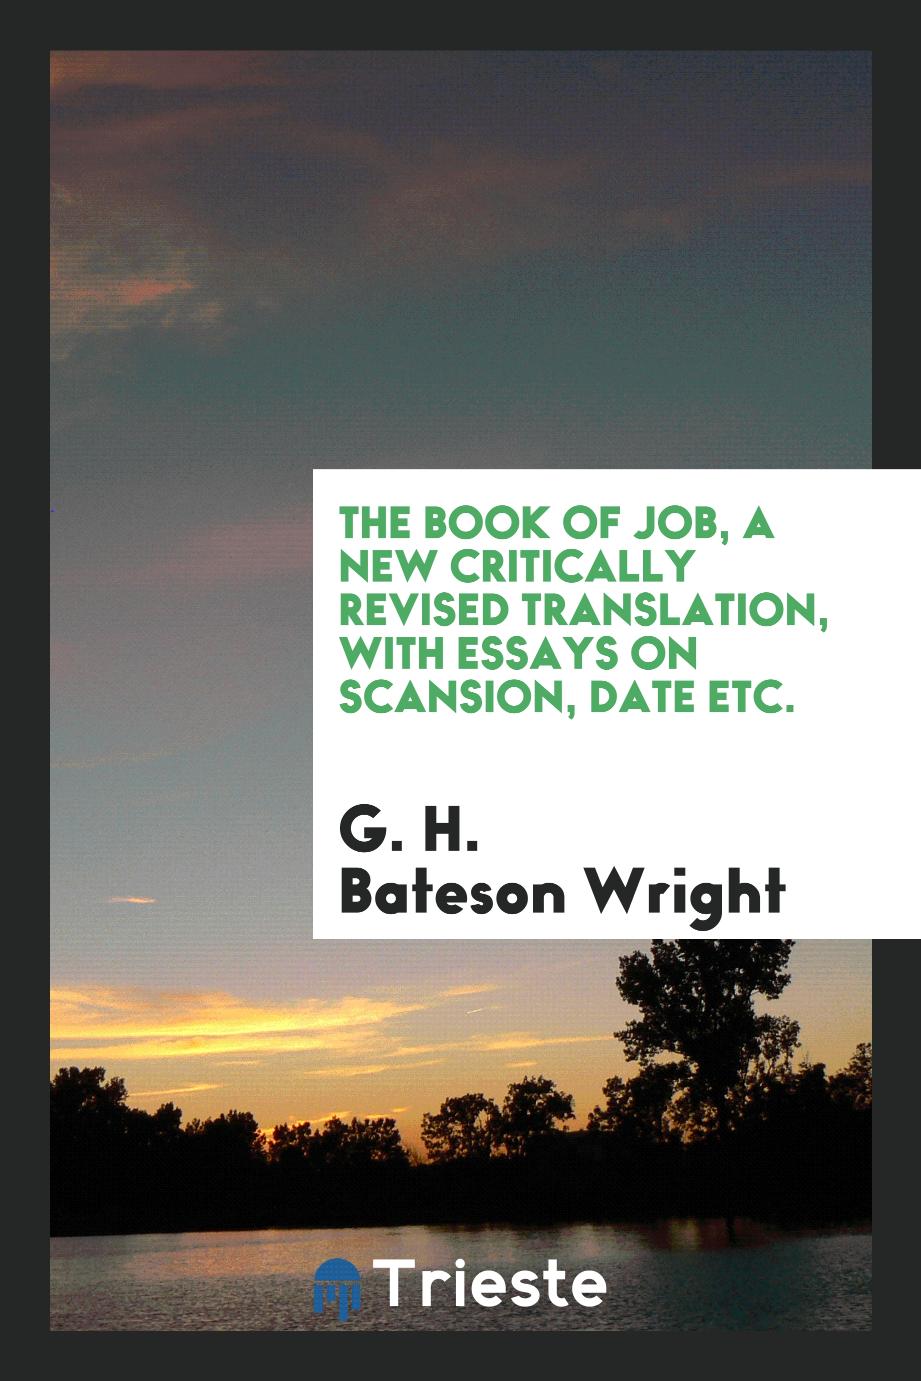 The Book of Job, a New Critically Revised Translation, with Essays on Scansion, Date Etc.